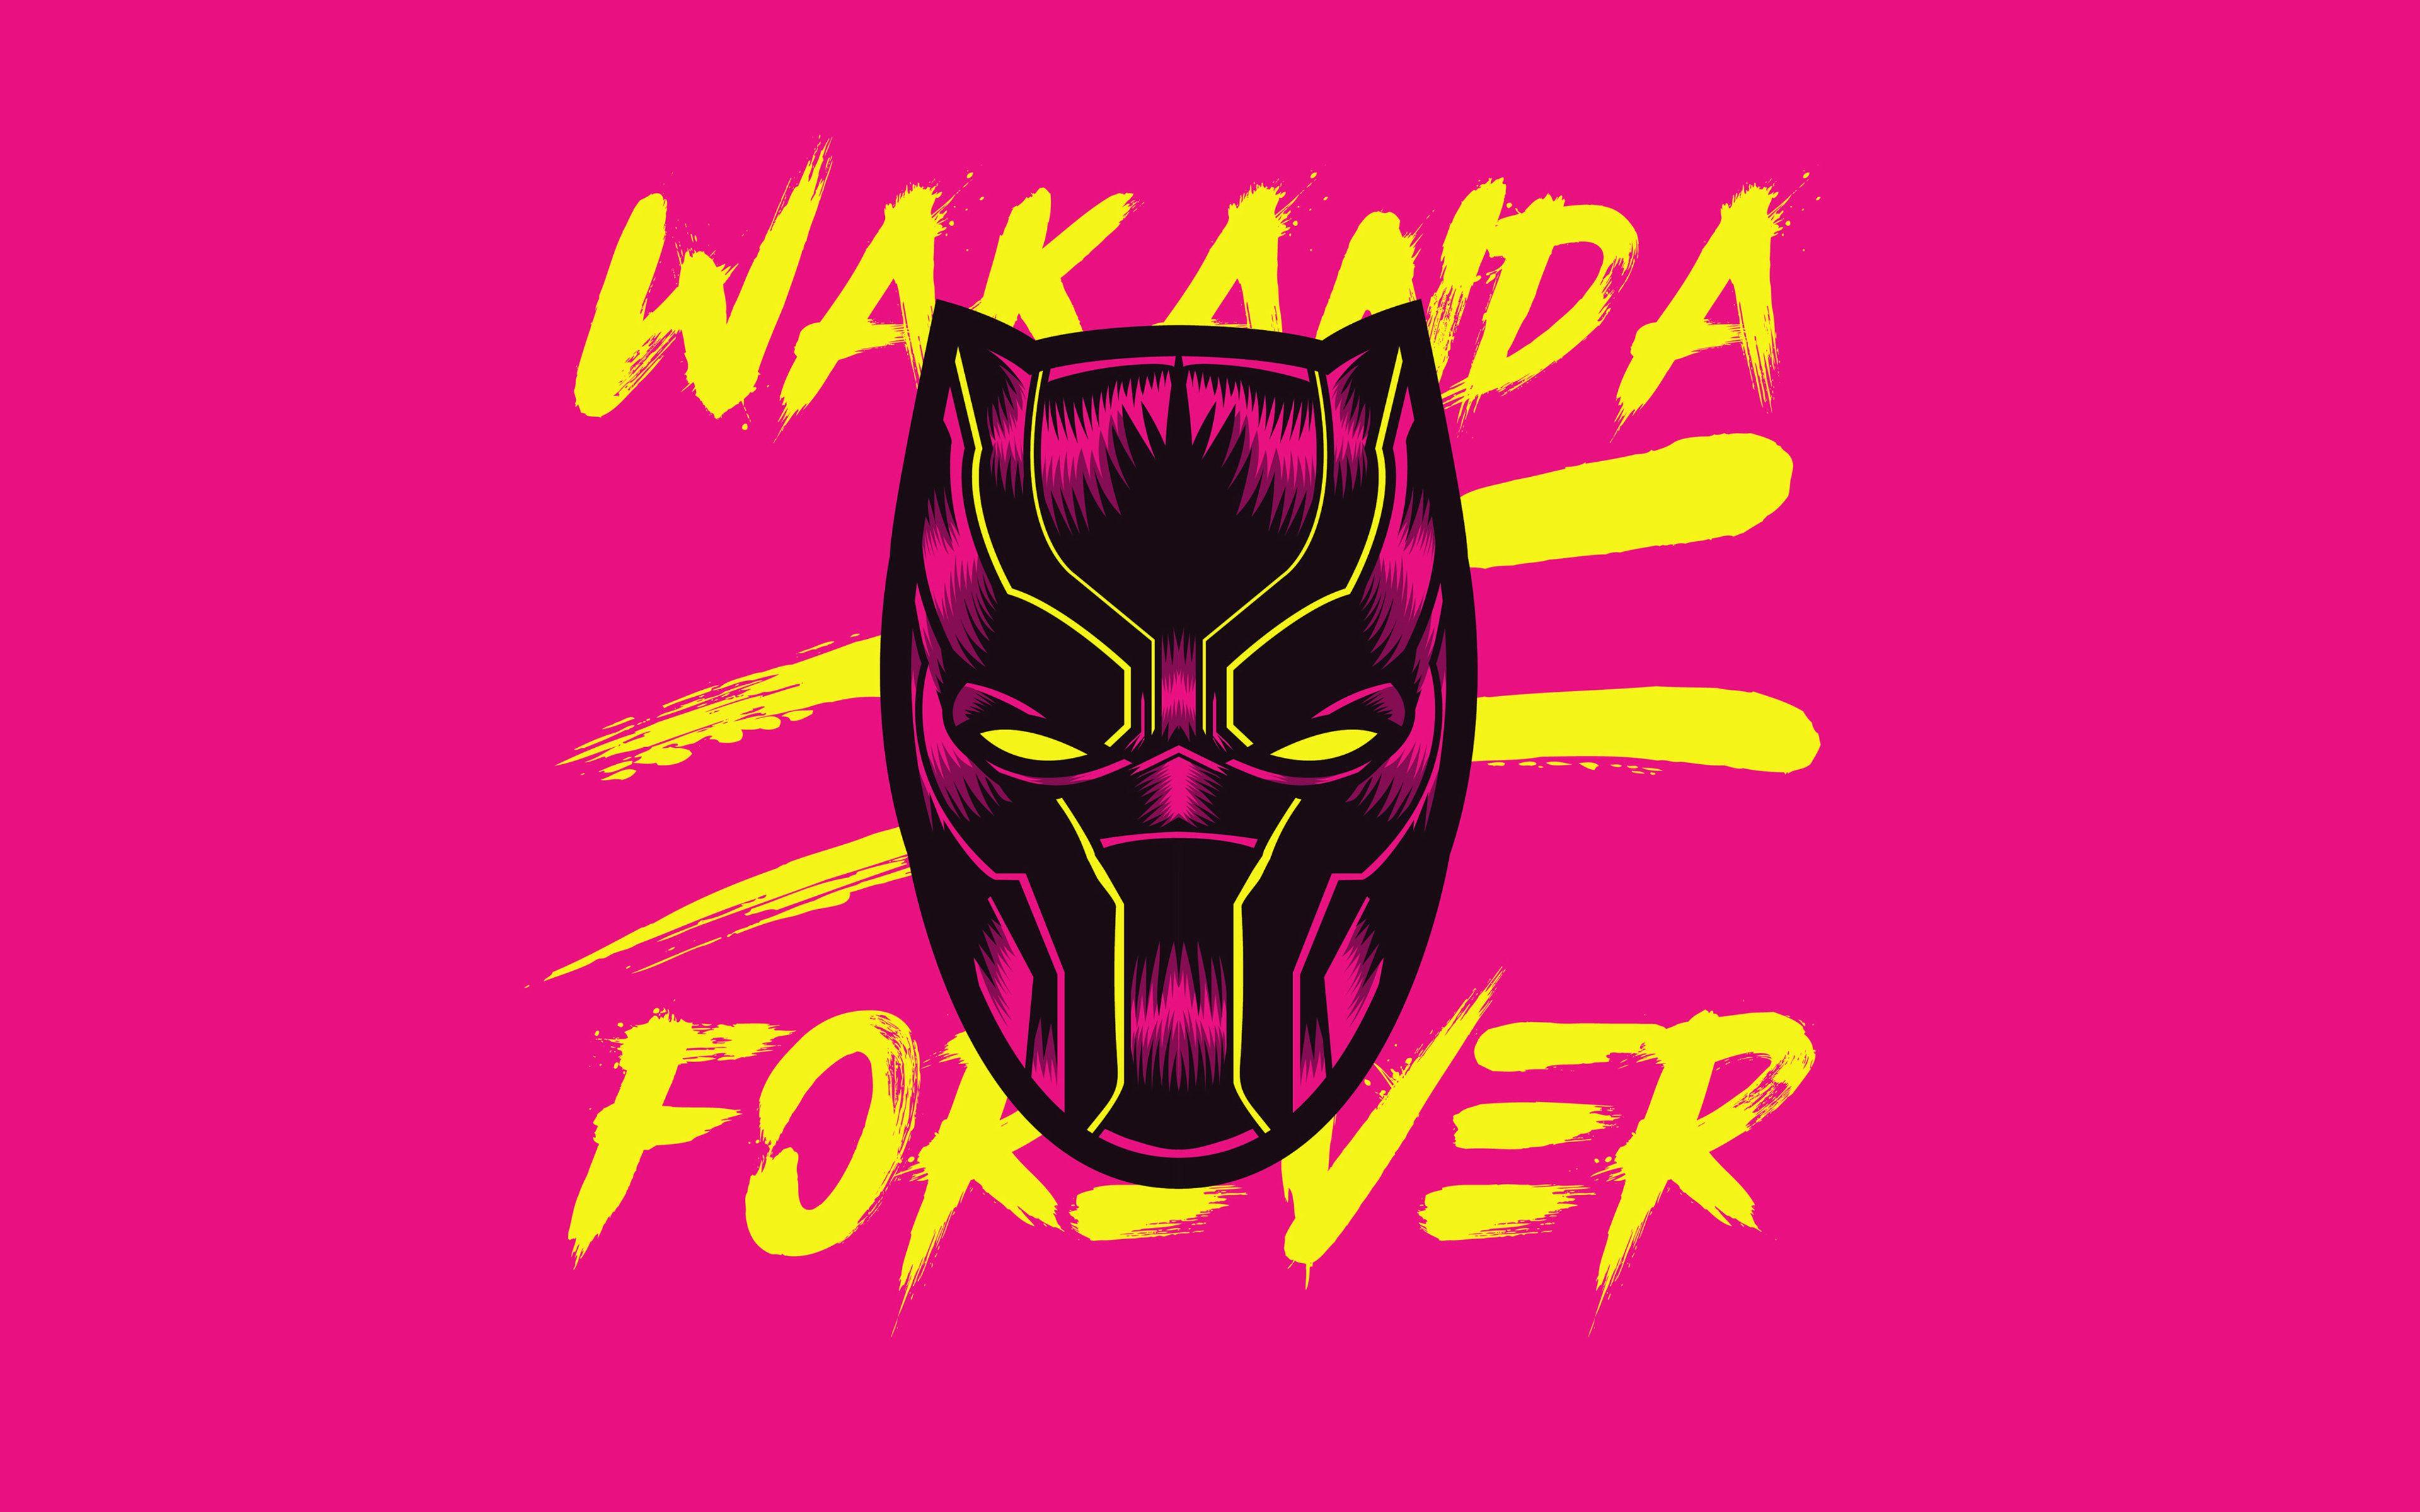 download the new Black Panther: Wakanda Forever